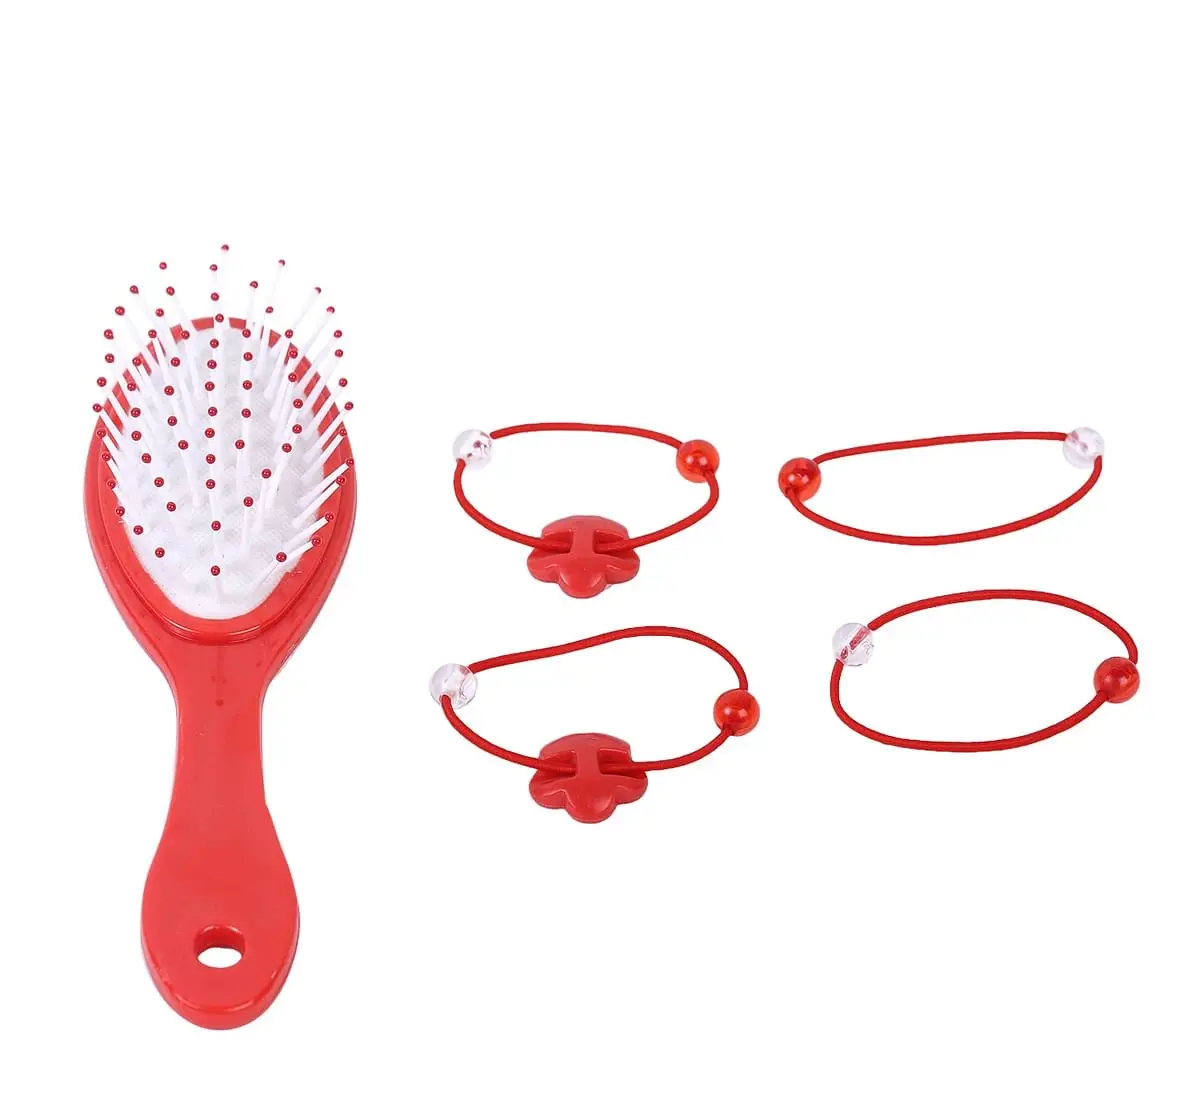 Minnie Mouse Hair Brush Set by Li'l Diva - 1 Hair Brush And 4 Rubber Bands For Girls 3 Years And Above, Red